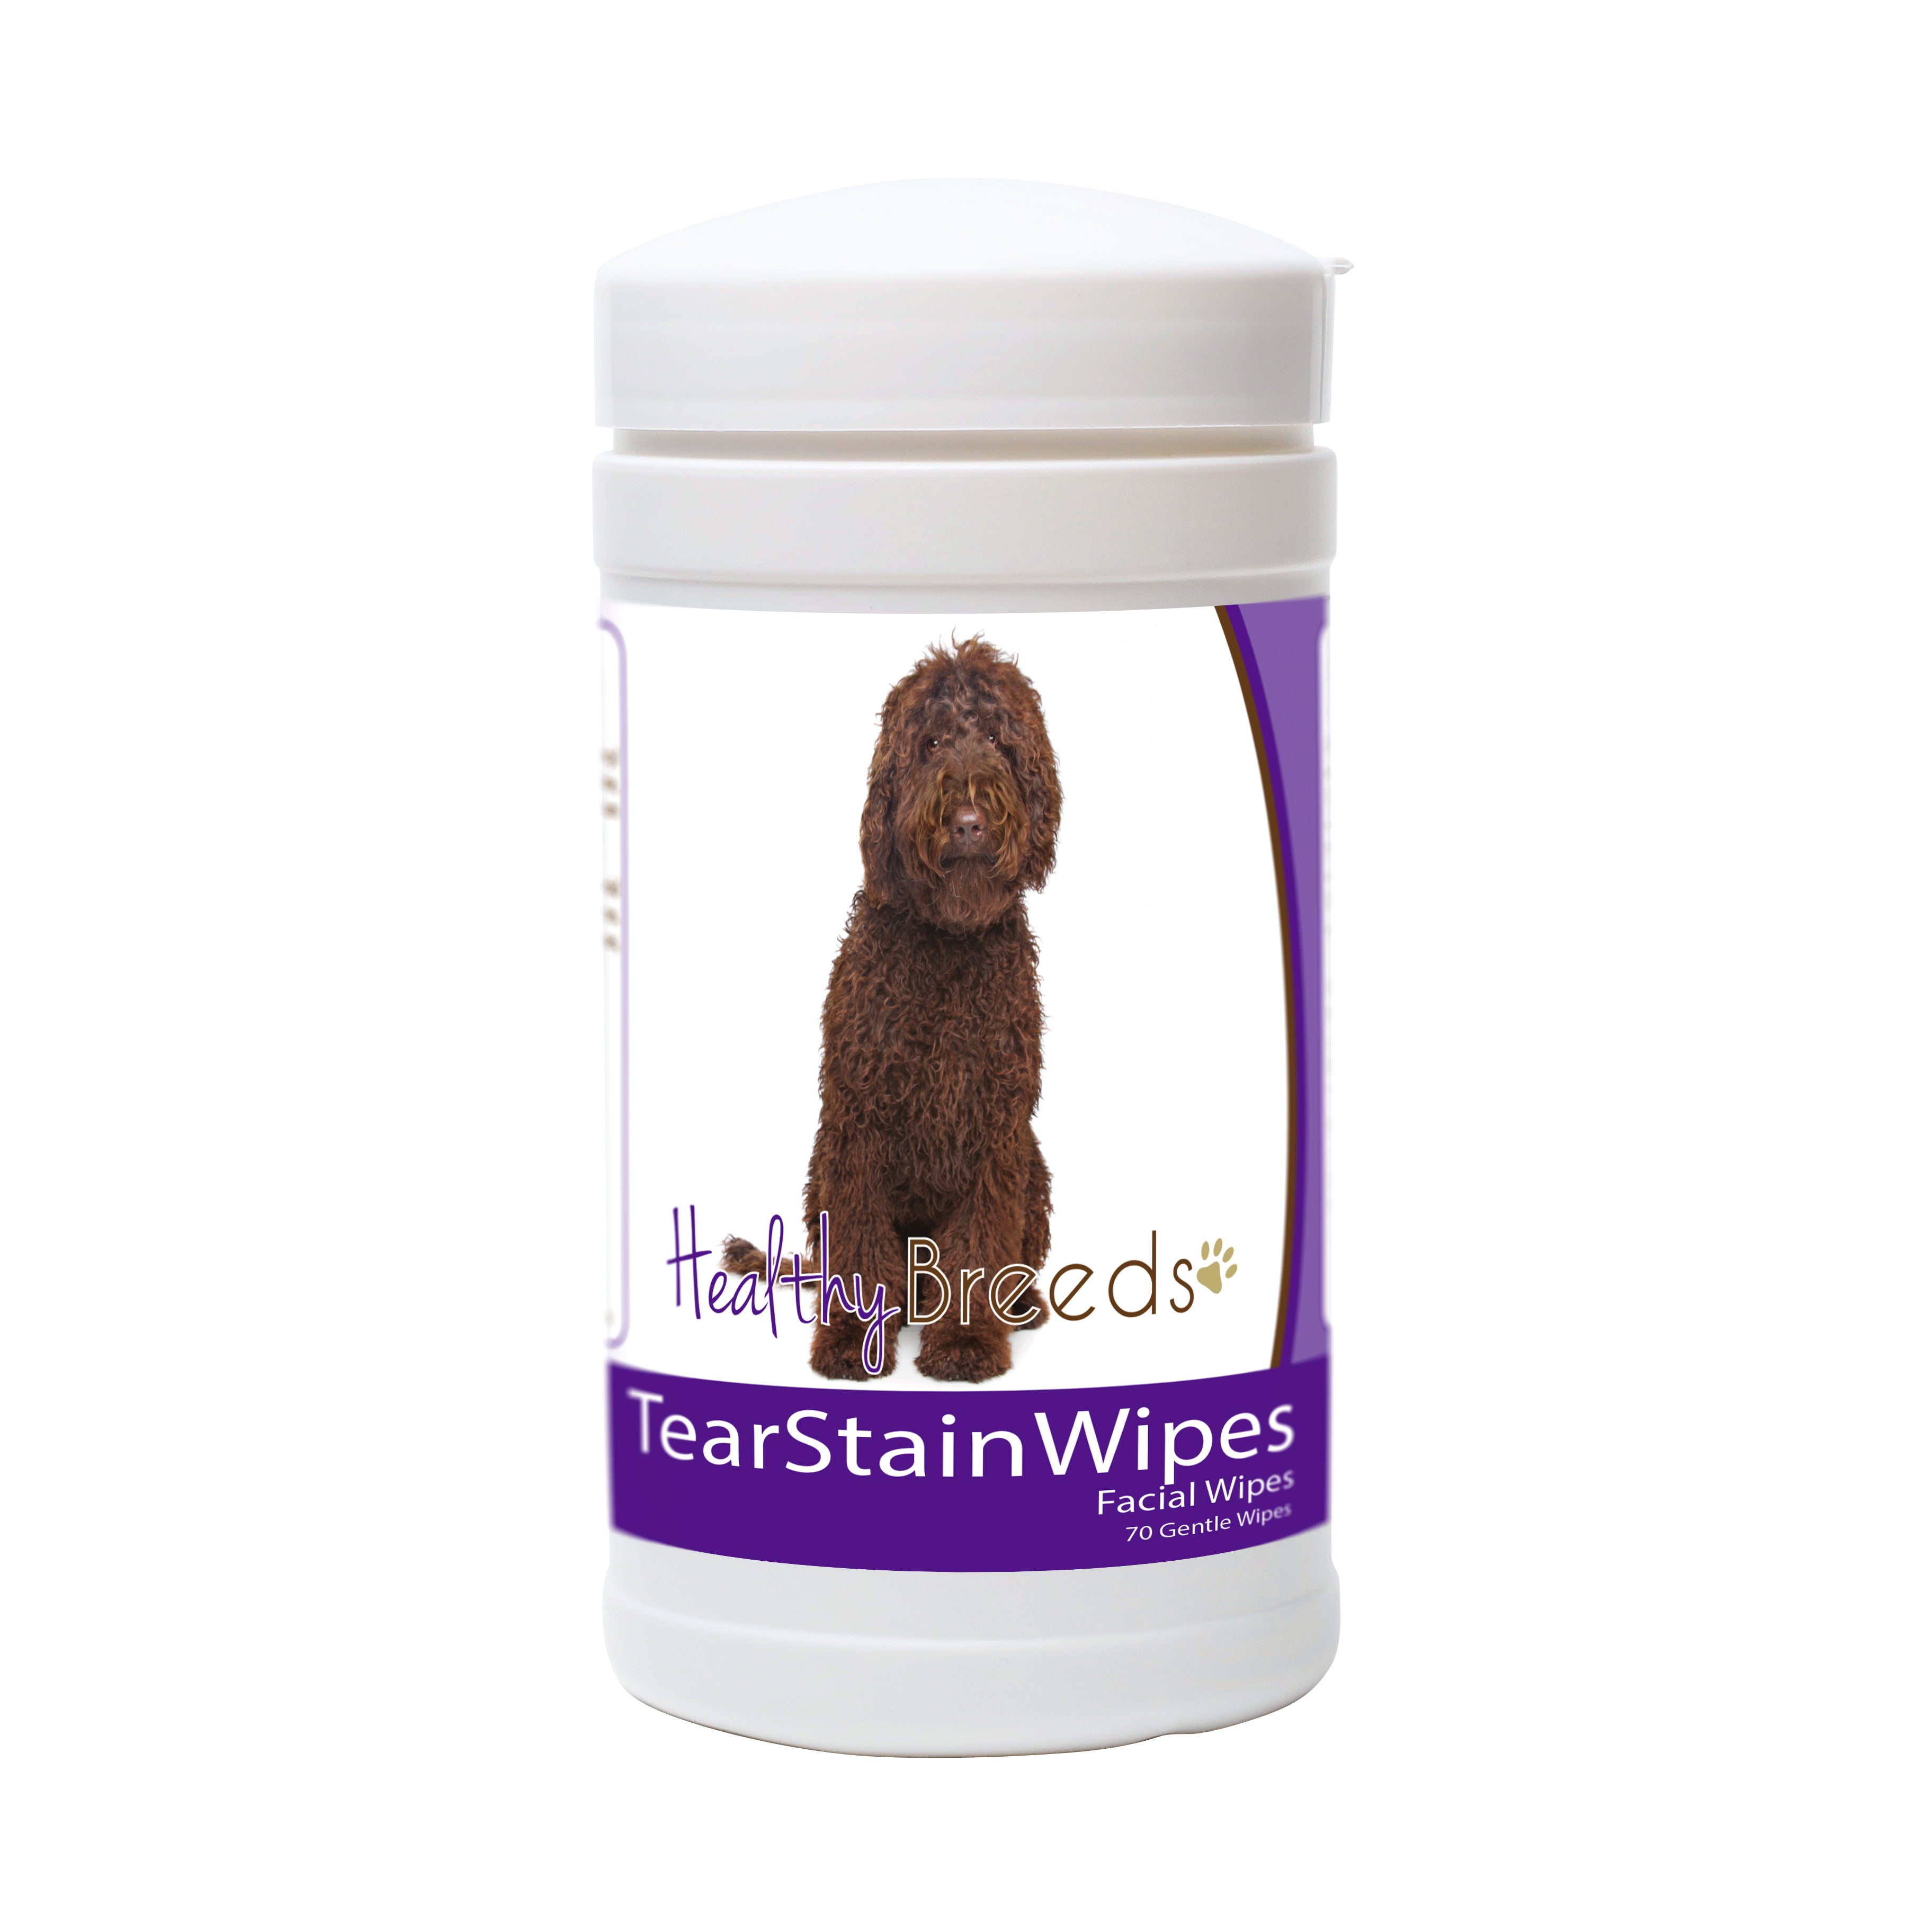 Labradoodle Tear Stain Wipes 70 Count